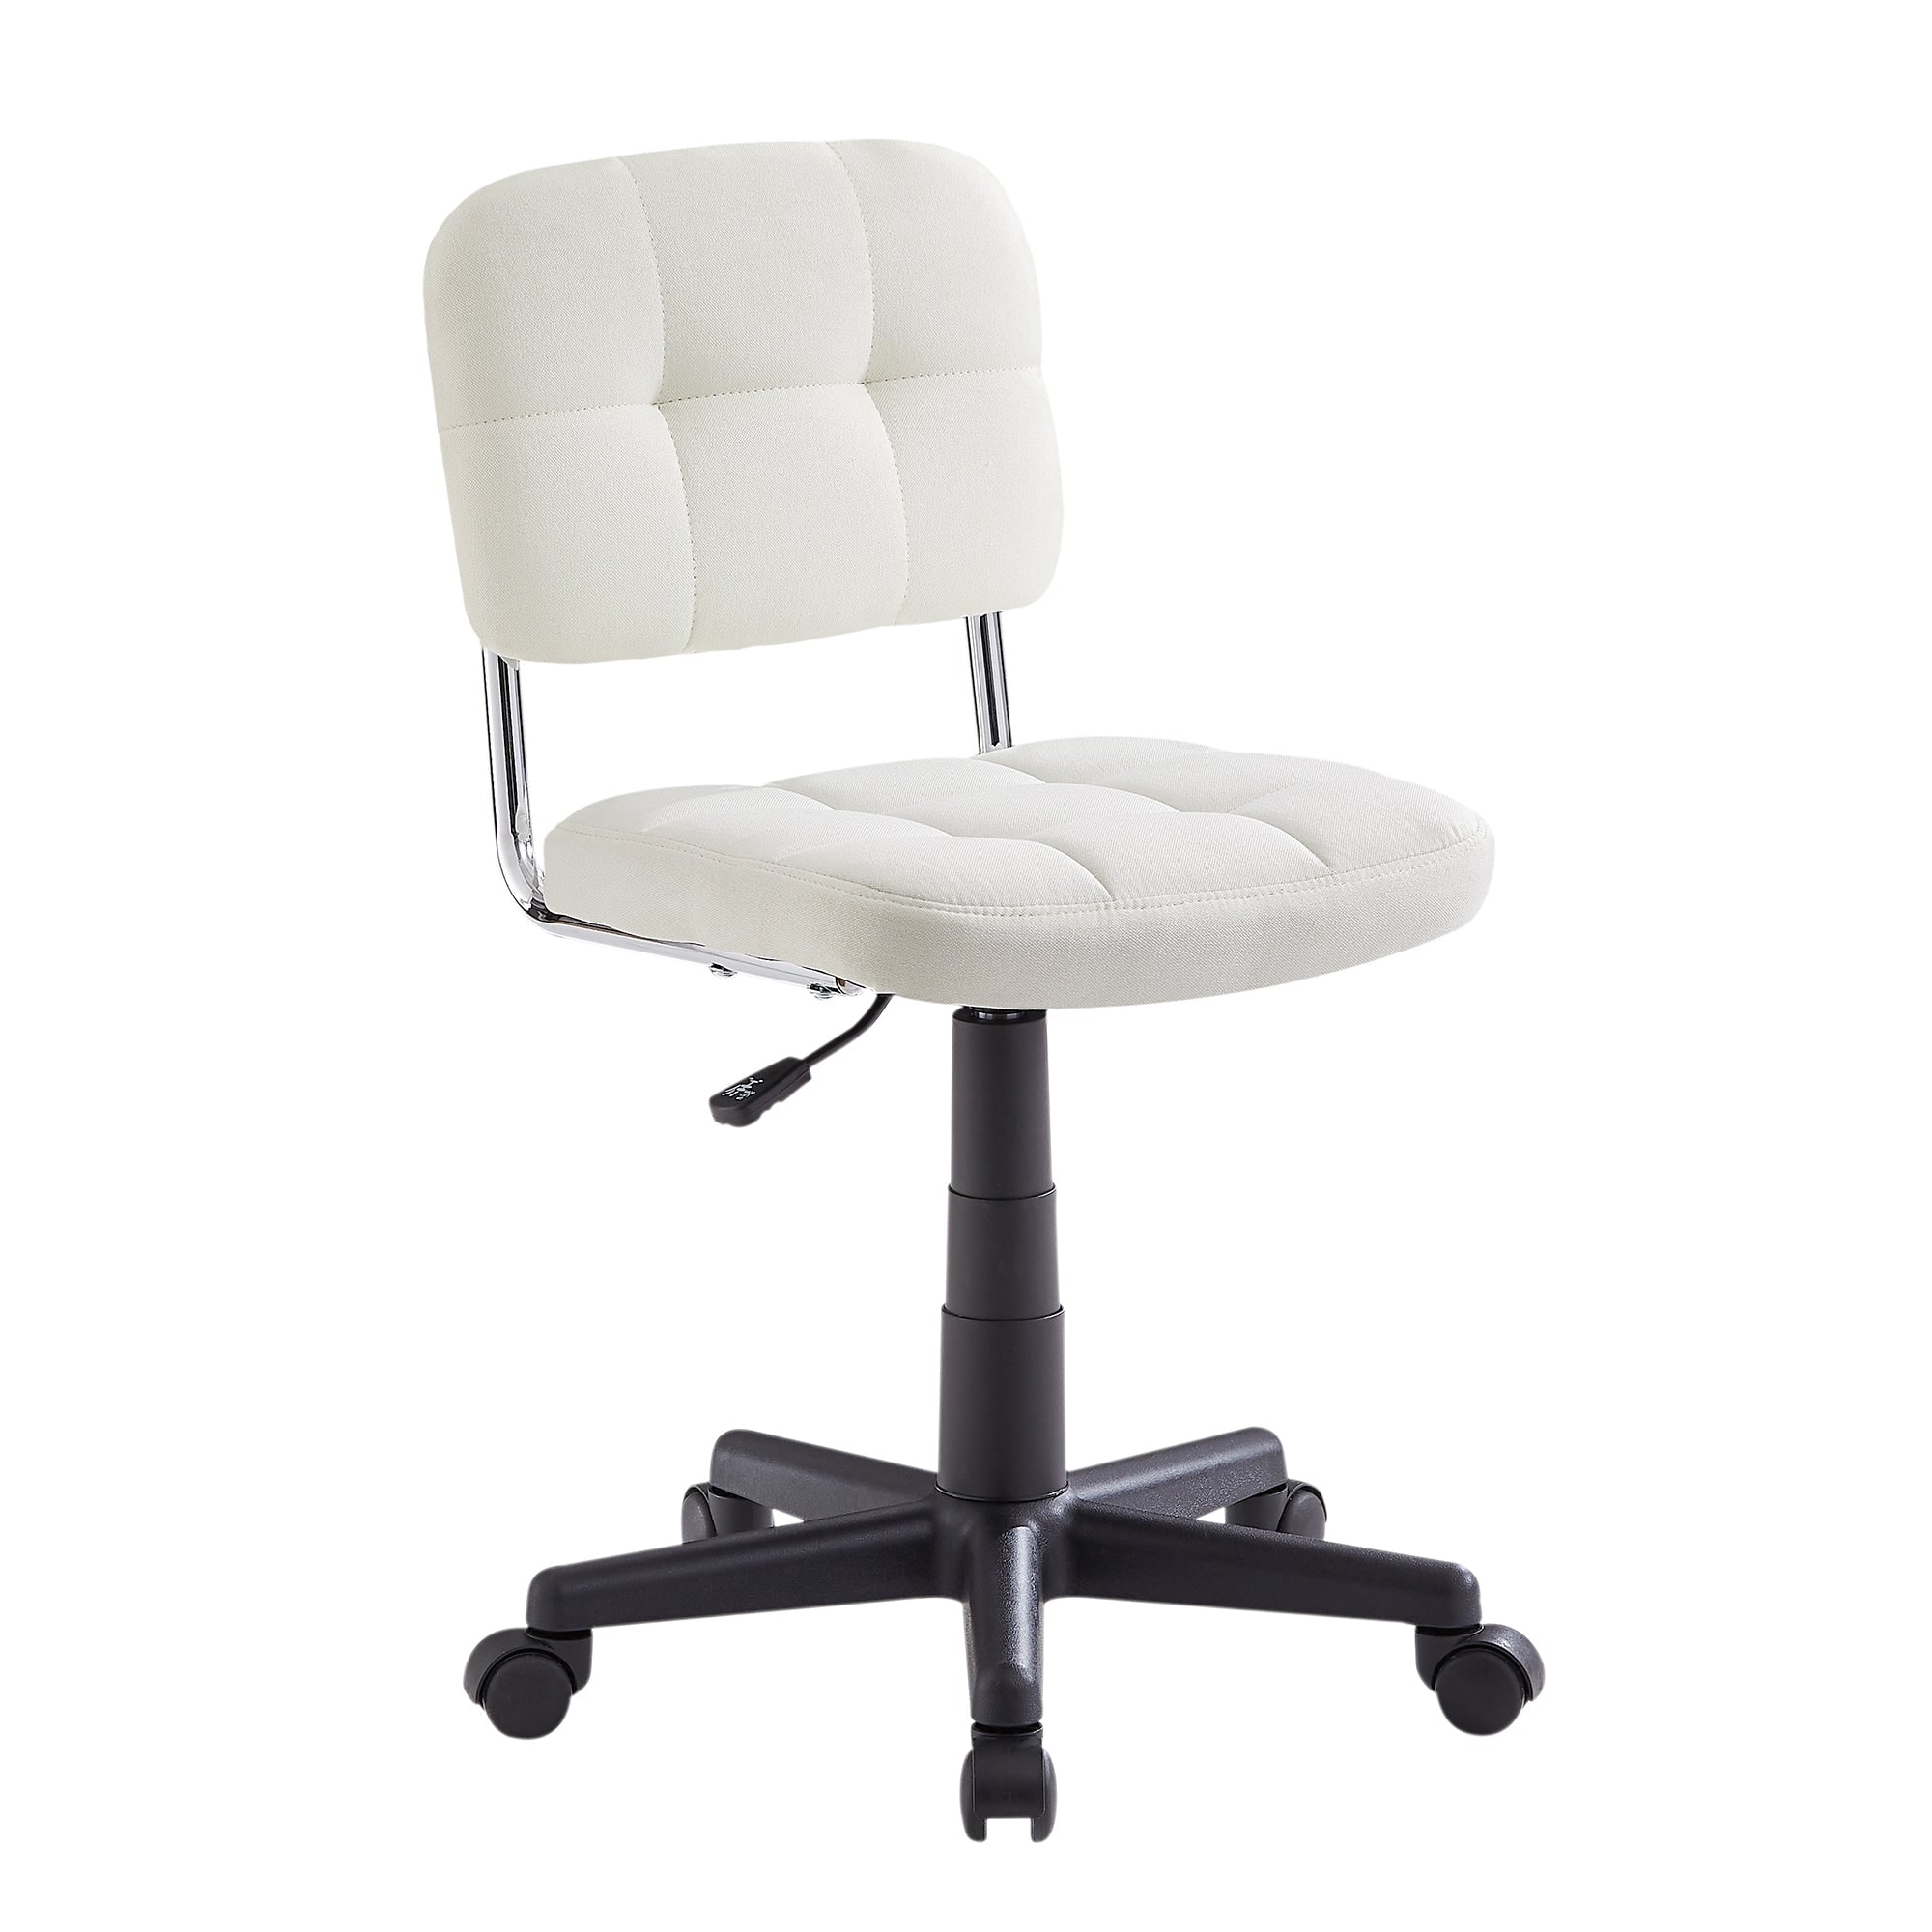 Armless Swivel Office Desk Chair Home Office Chair with Wheels Adjustable Height Computer Task Chair for Small Space